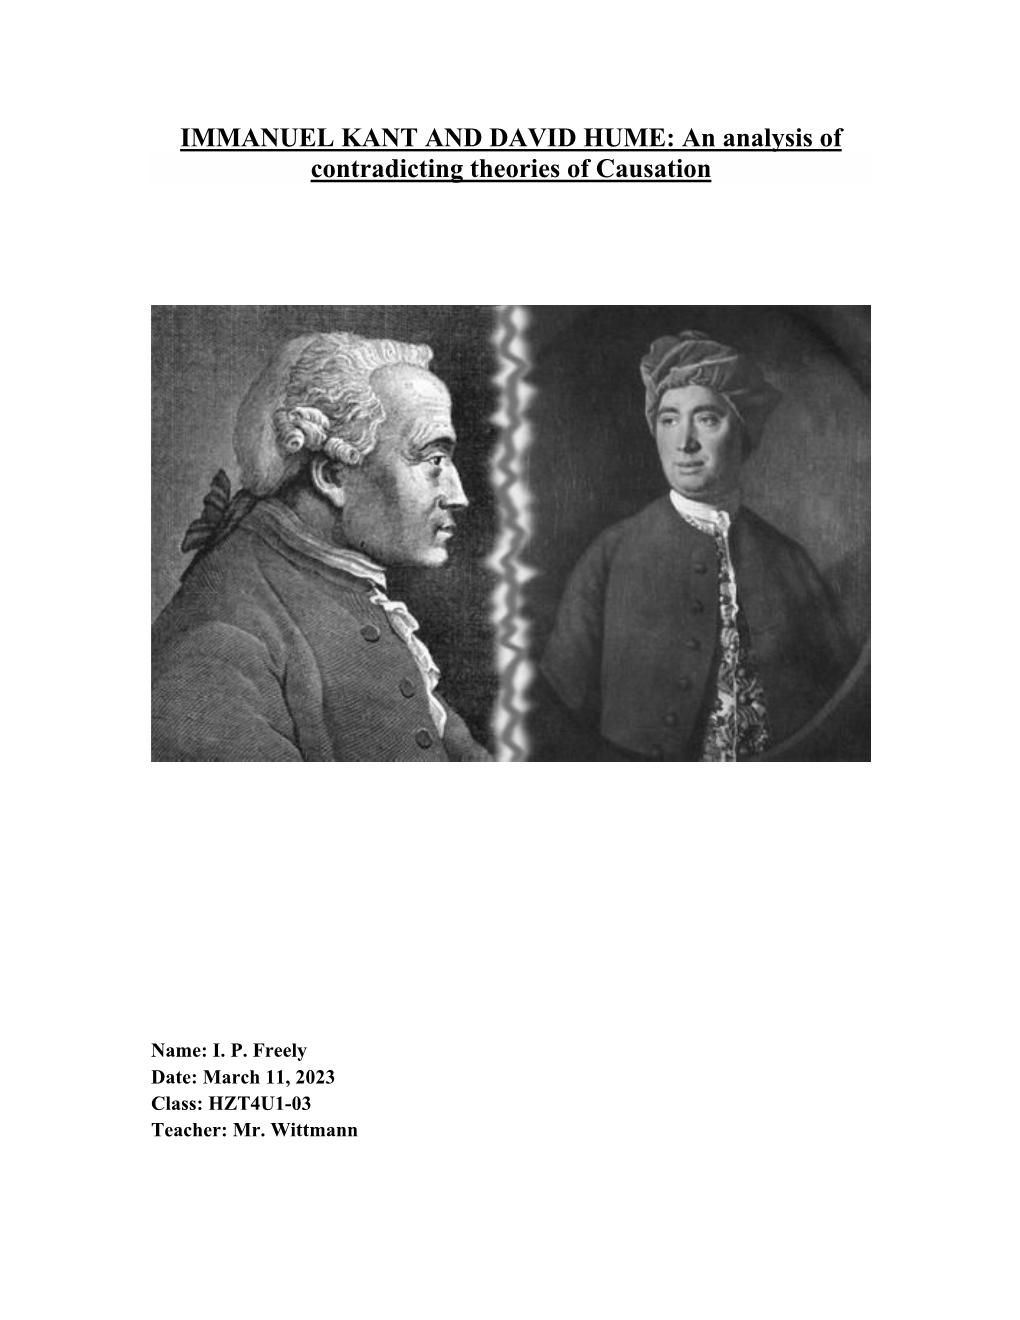 IMMANUEL KANT and DAVID HUME: an Analysis of Contradicting Theories of Causation